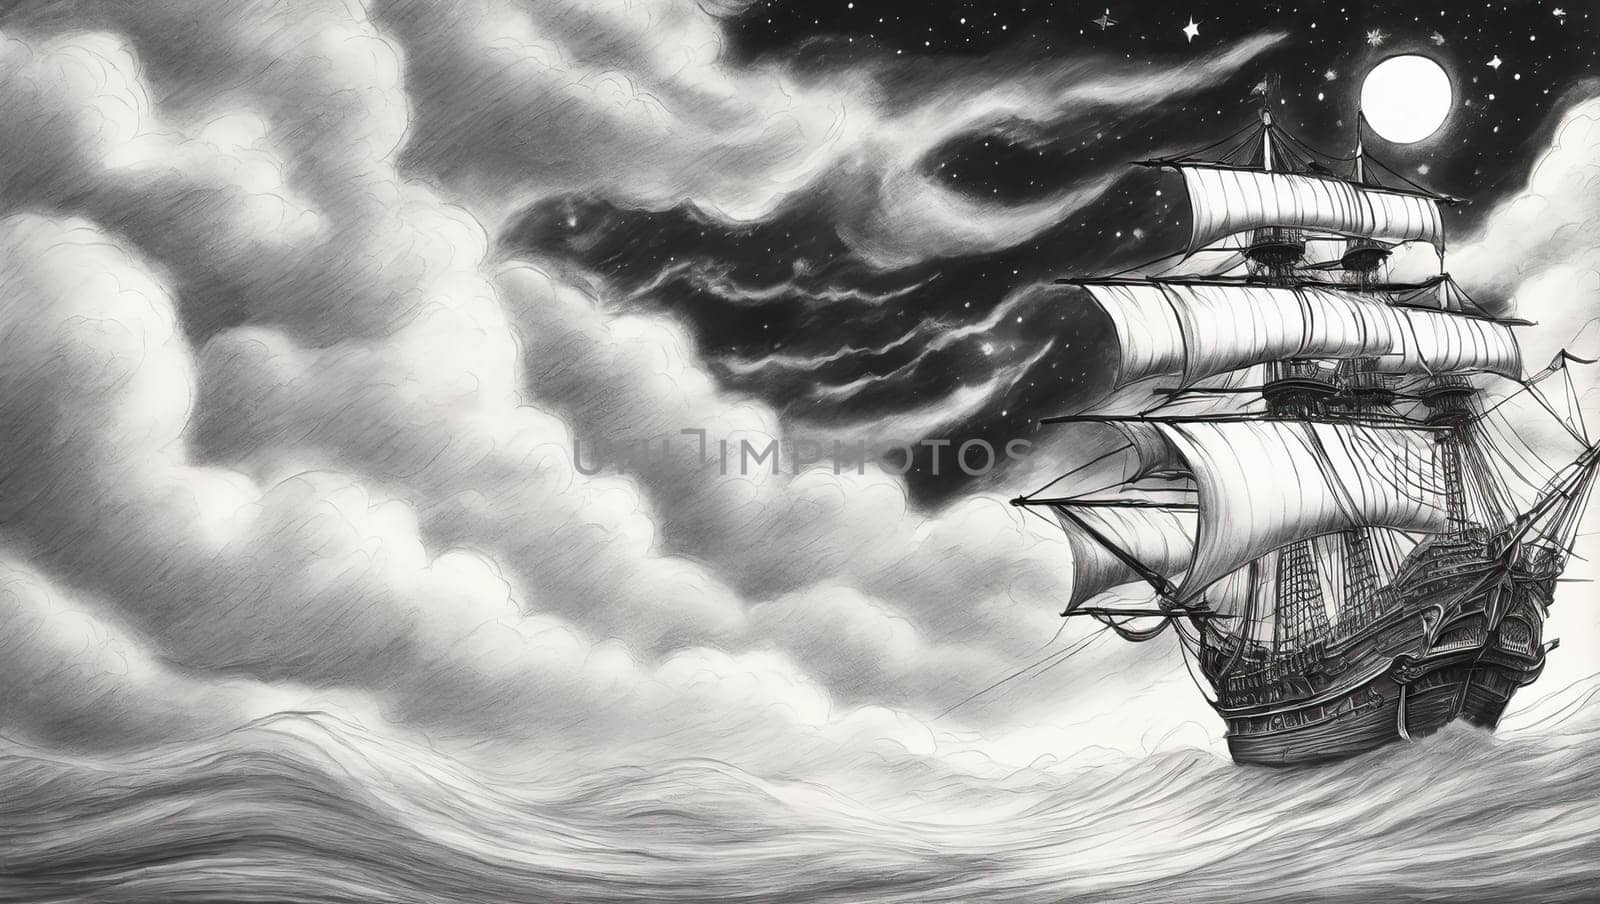 A sailboat drawn in black pencil by applesstock